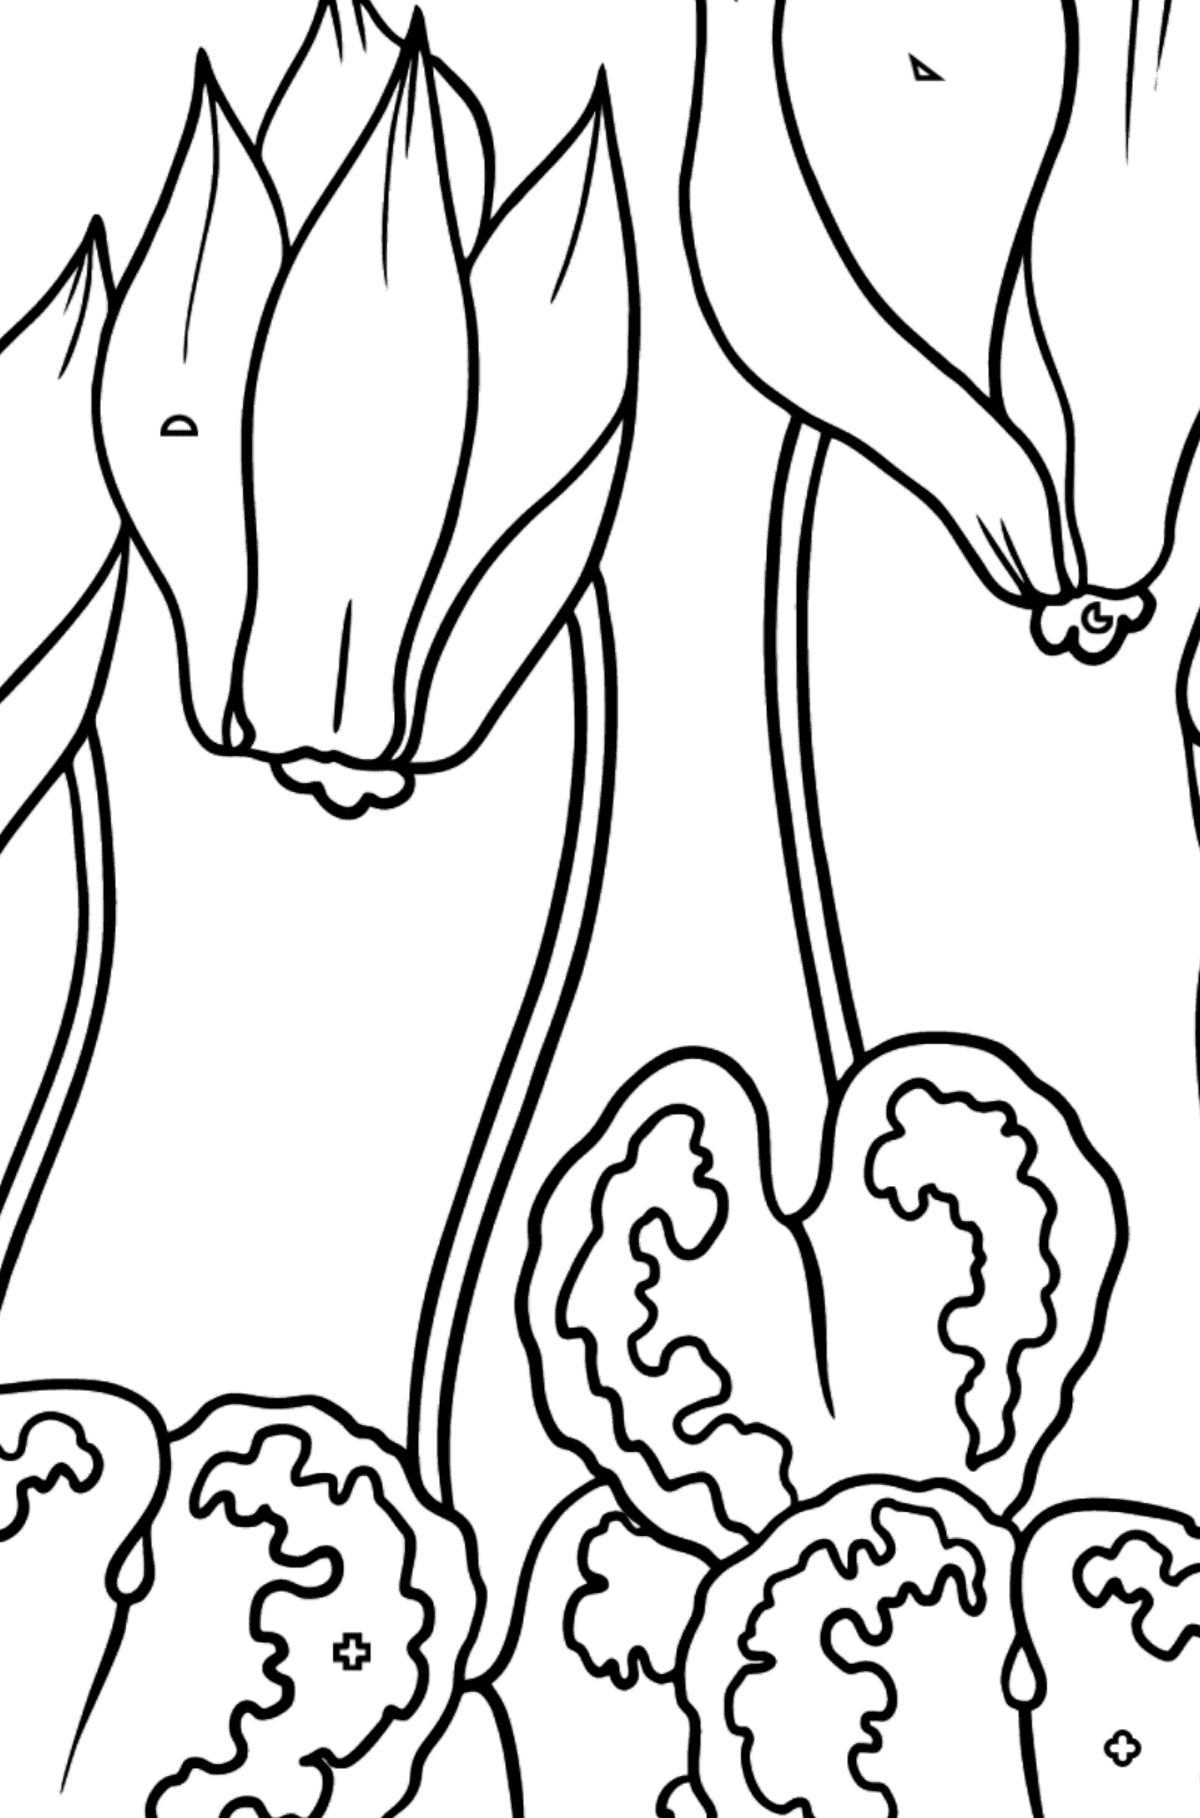 Coloring Page Red and Pink Cyclamen - Coloring by Geometric Shapes for Kids